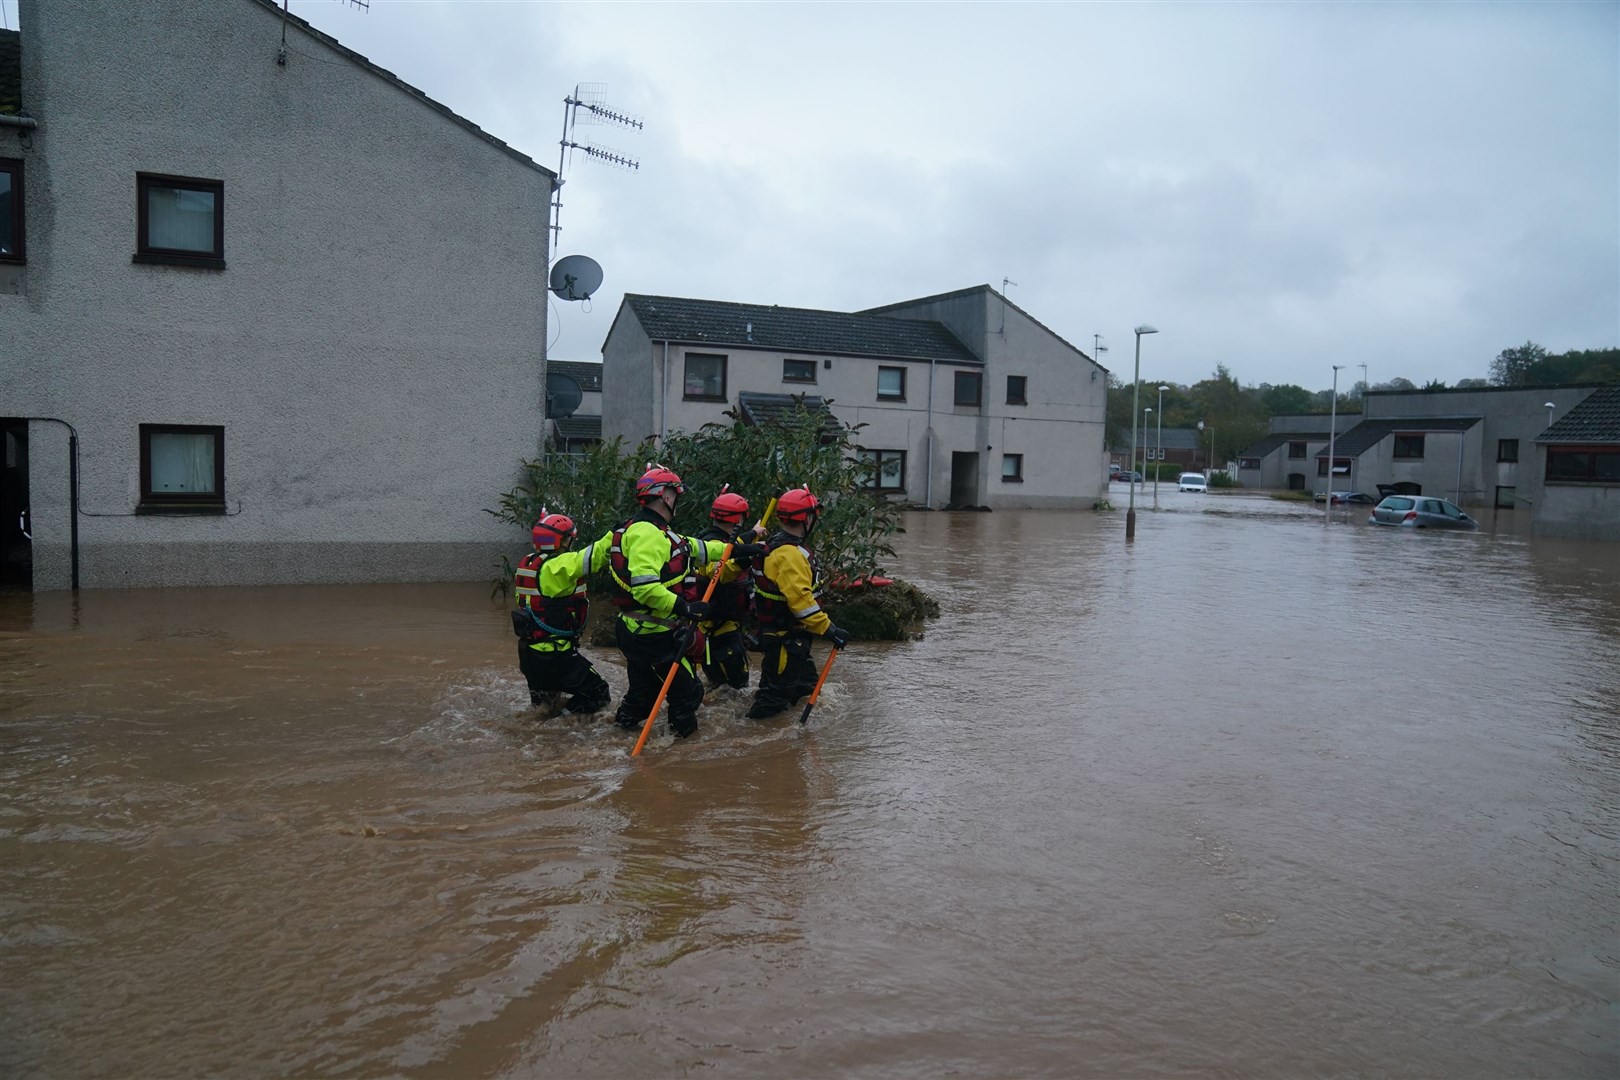 Emergency workers wade through flood water in Brechin as Storm Babet batters the country (Andrew Milligan/PA)